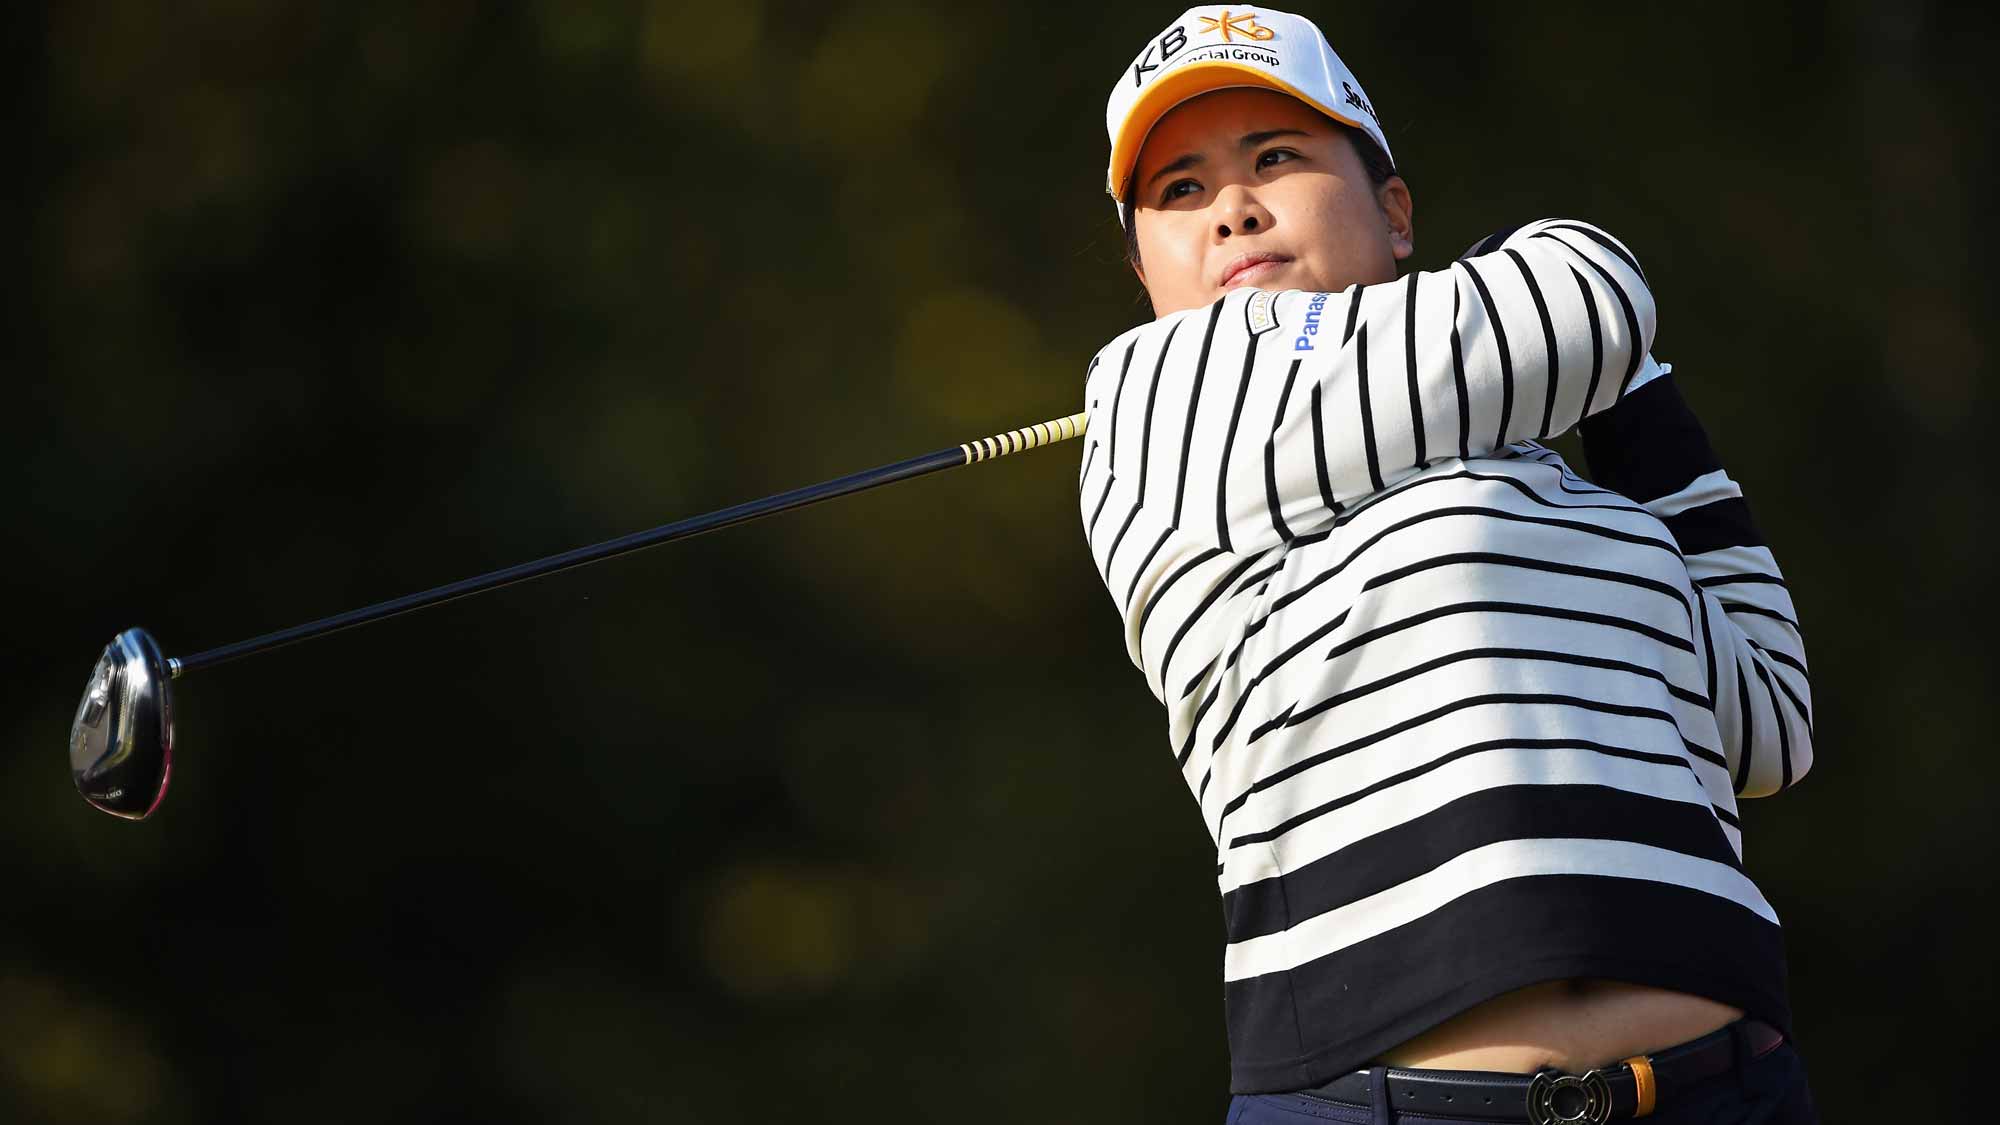 Inbee Park during the first round of the Evian Championship 